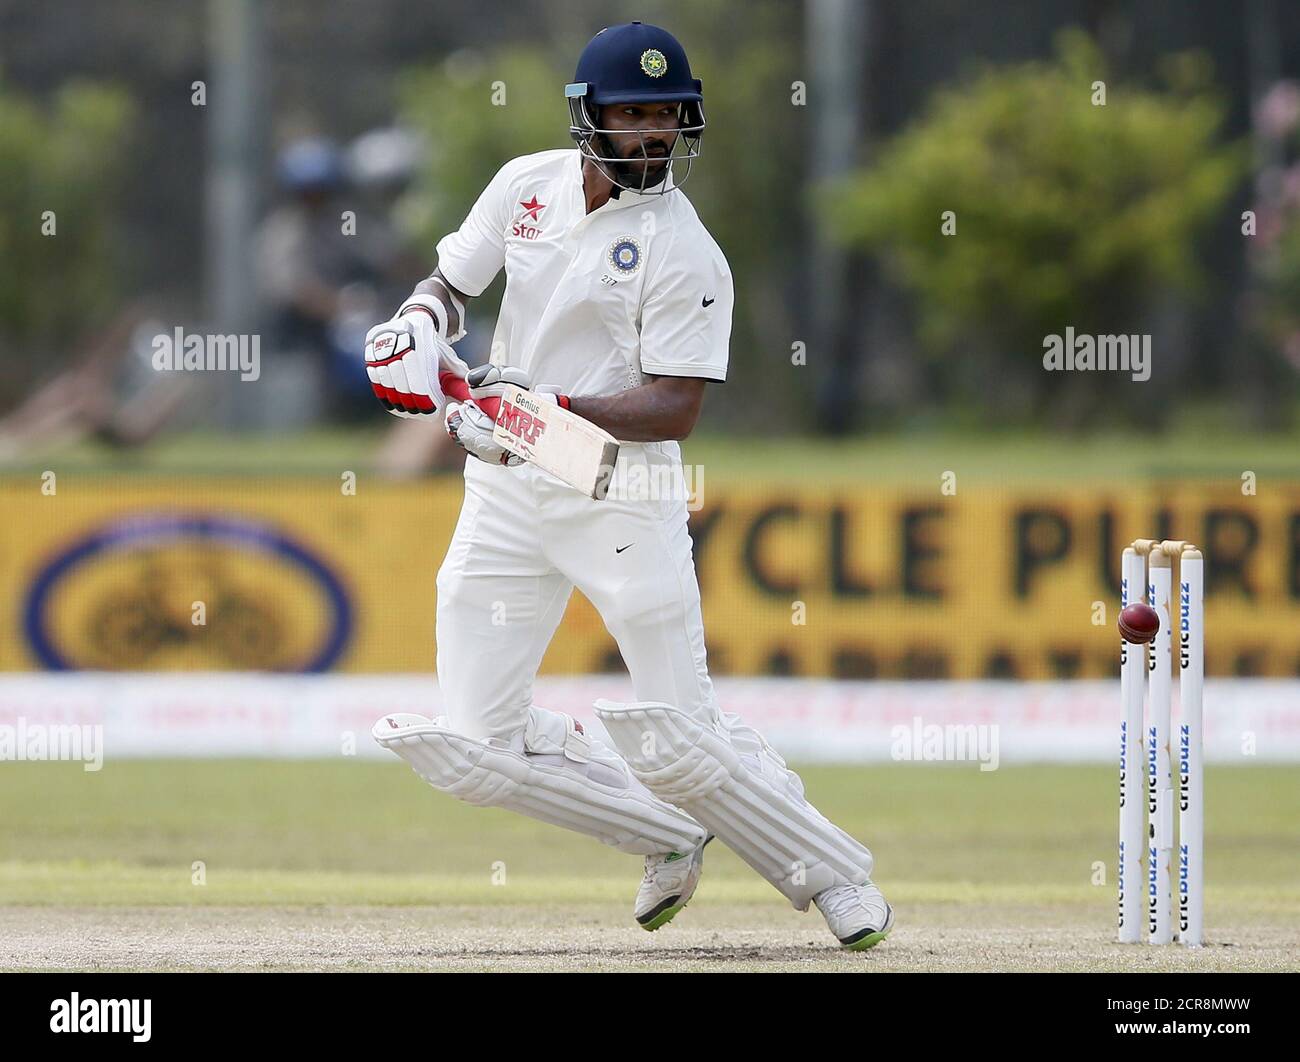 India's Shikhar Dhawan plays a shot during the second day of their first test cricket match against Sri Lanka in Galle, August 13, 2015. REUTERS/Dinuka Liyanawatte Stock Photo